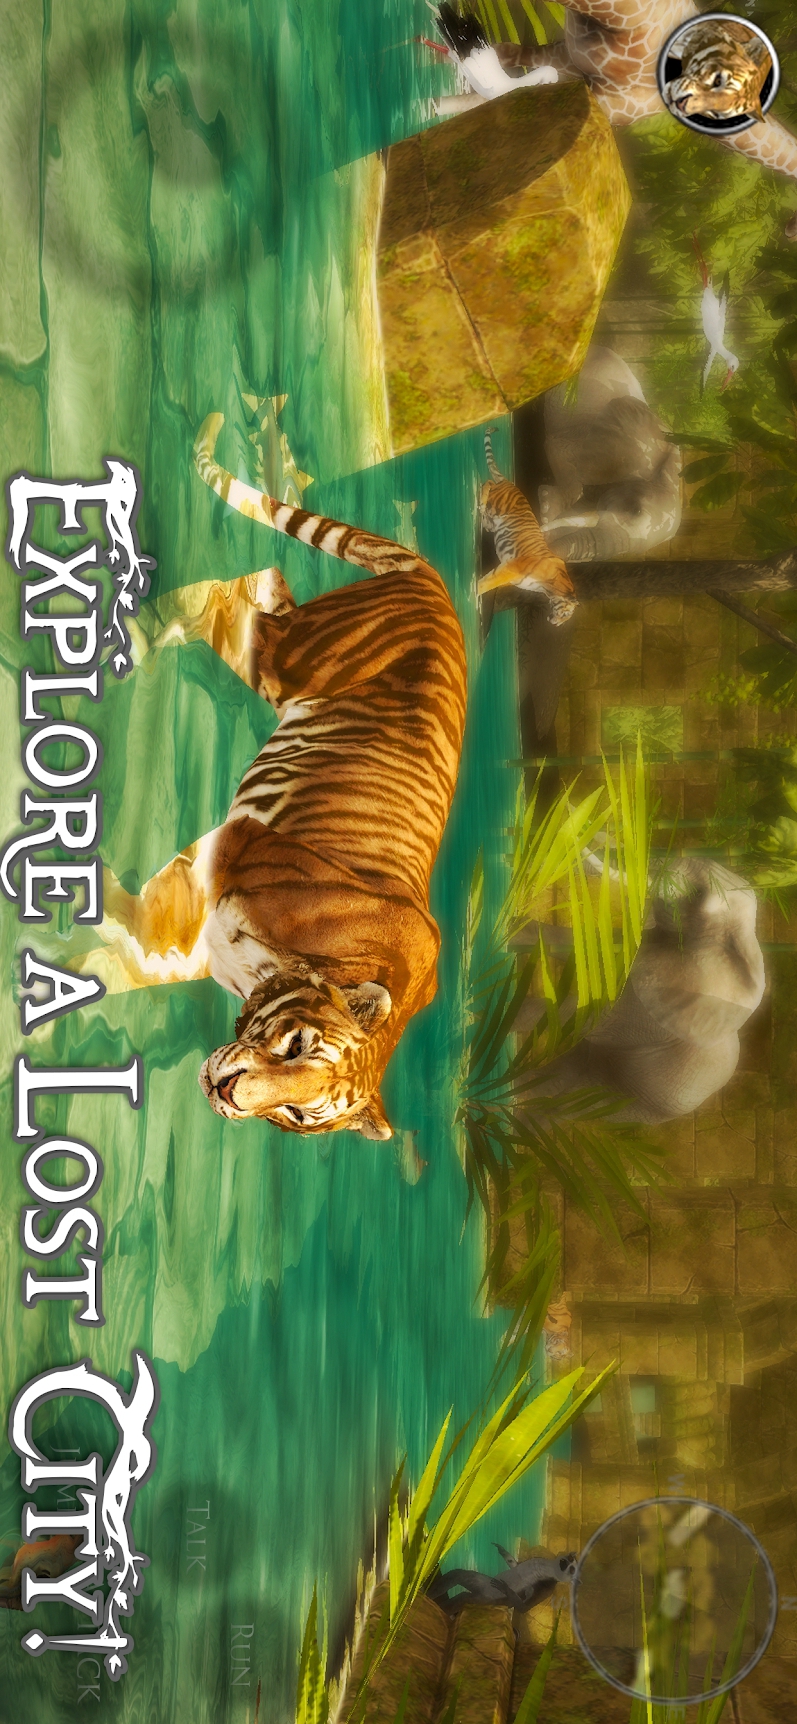 Ultimate Tiger Simulator 2(More attribute points are used)